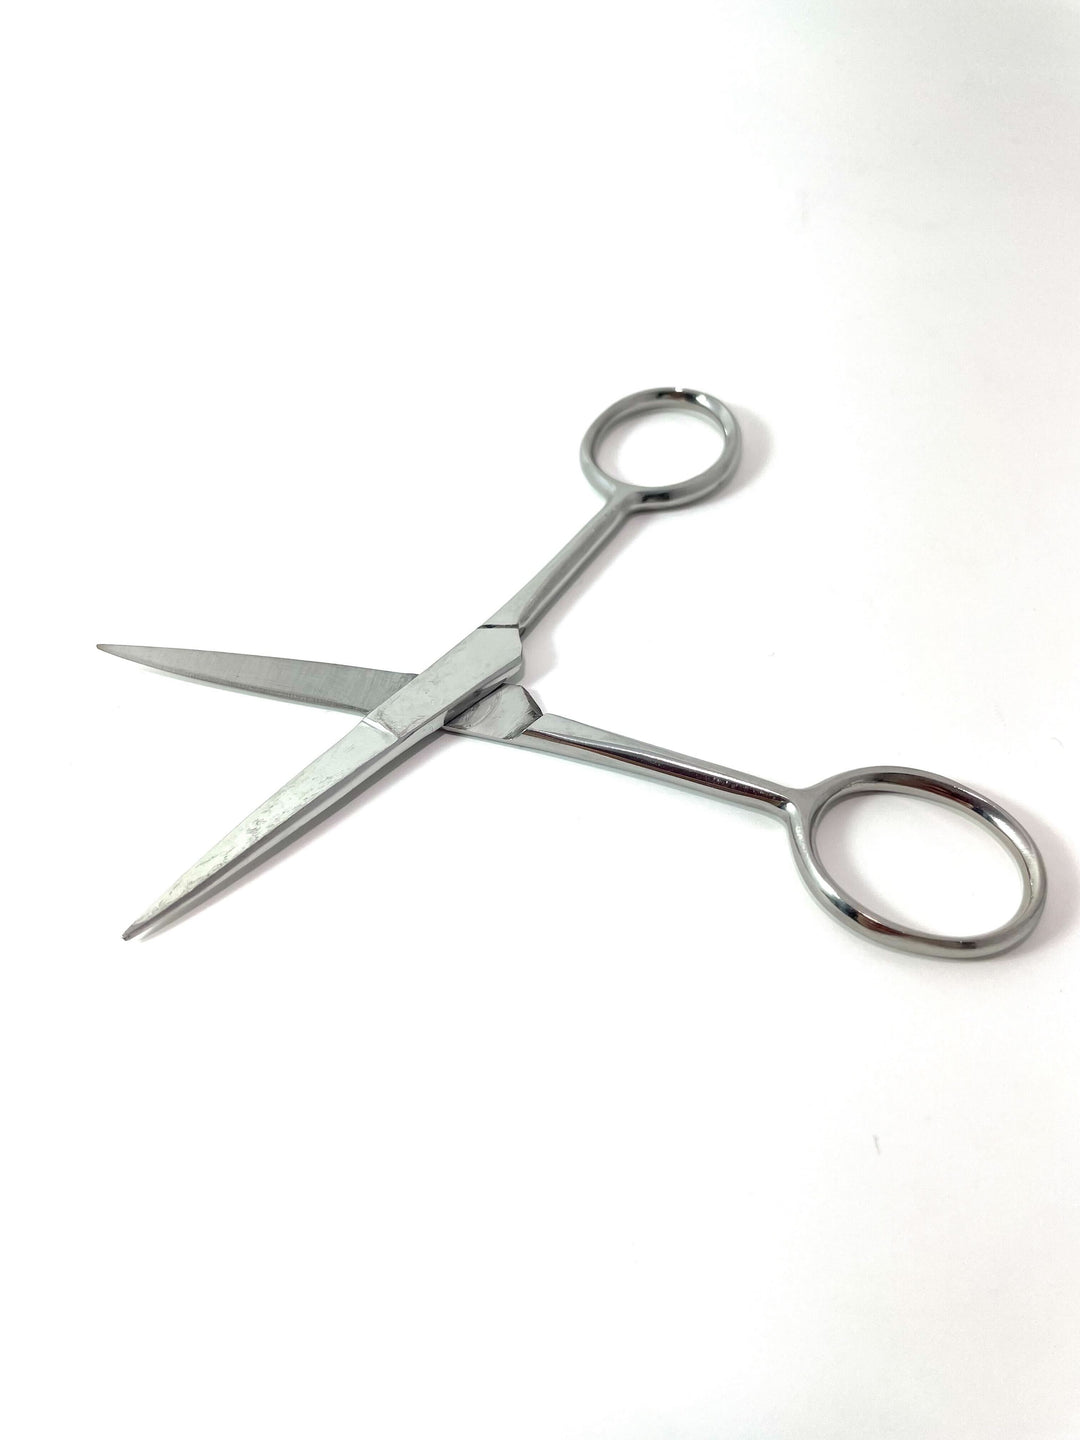 Stainless Steel Dissecting Scissors